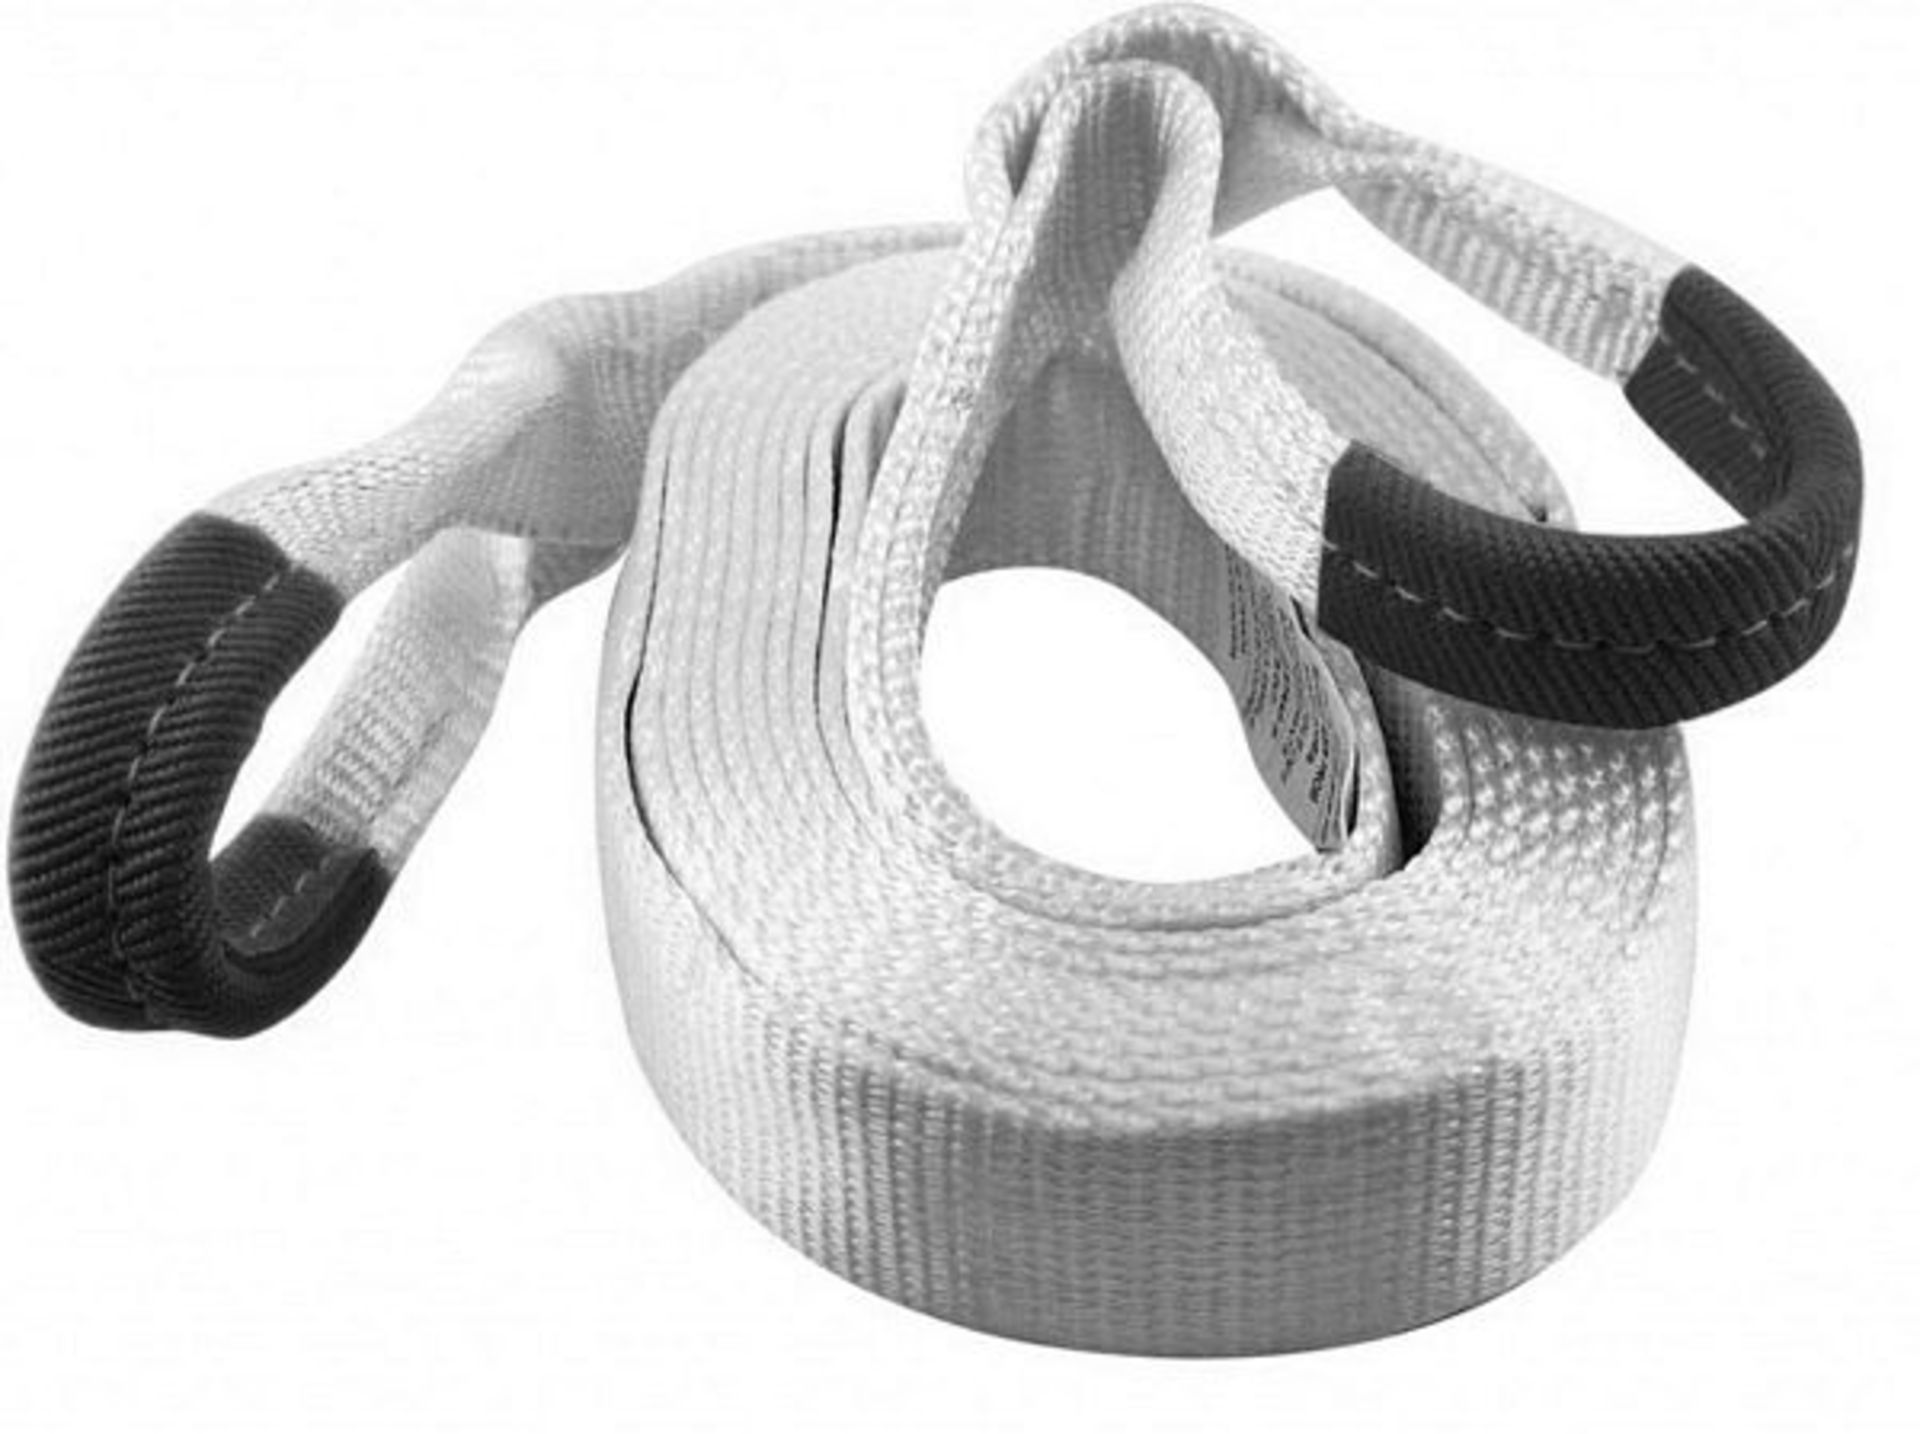 "NEW" (qty - 4) Heavy Duty Tow Strap- 3" x 30' 27,000 Lb Breaking Strength 13,500 Max Vehicle Weight - Bild 3 aus 9